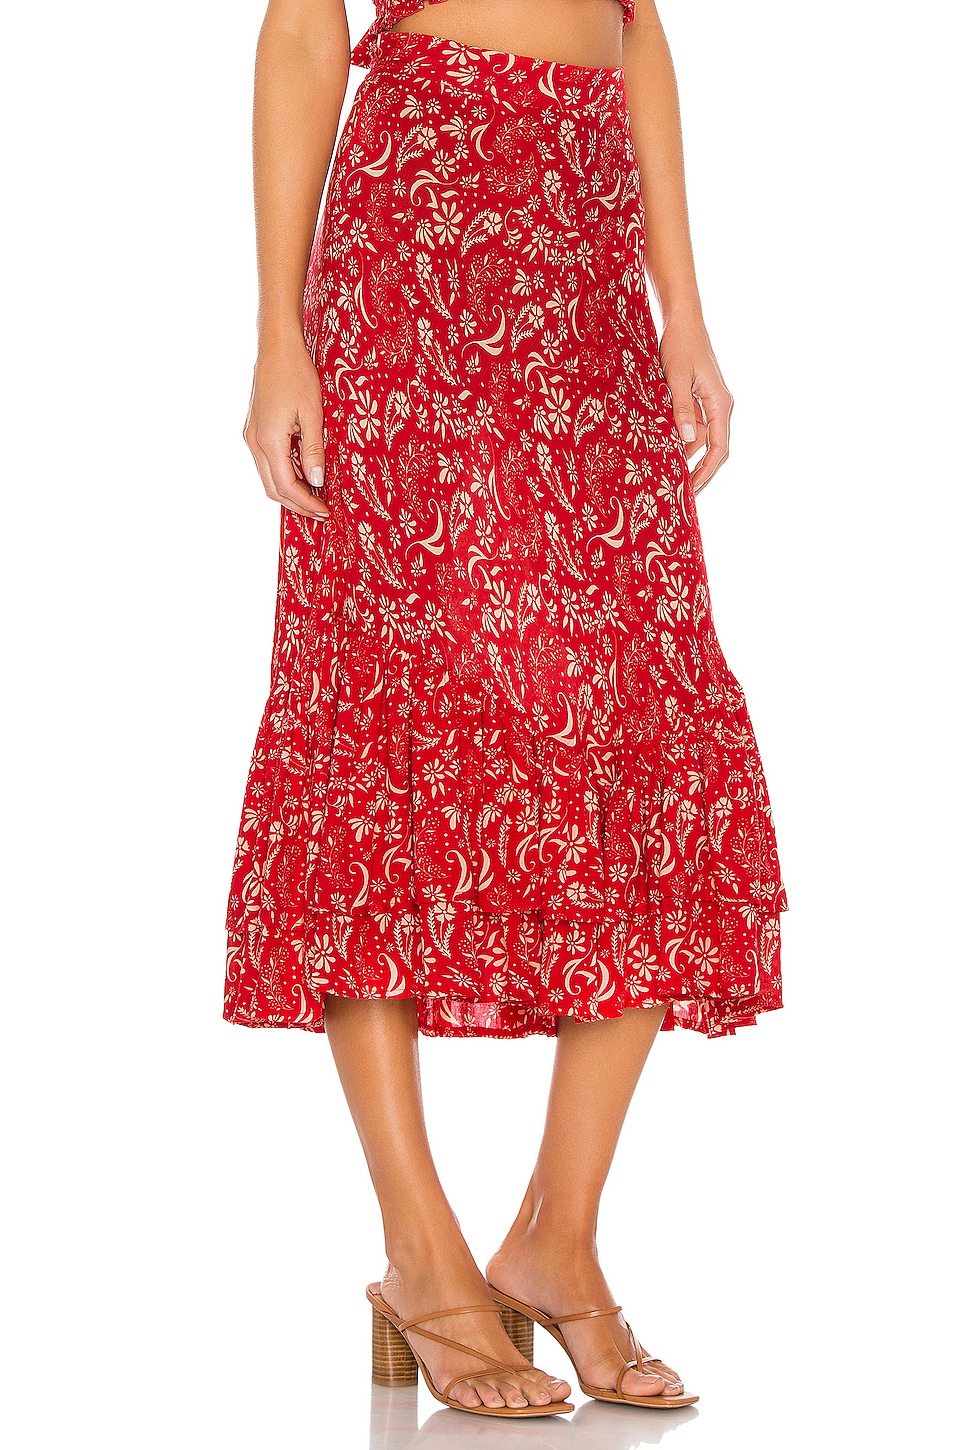 coolchange Florence Meadow Skirt in Flame & Buff | REVOLVE